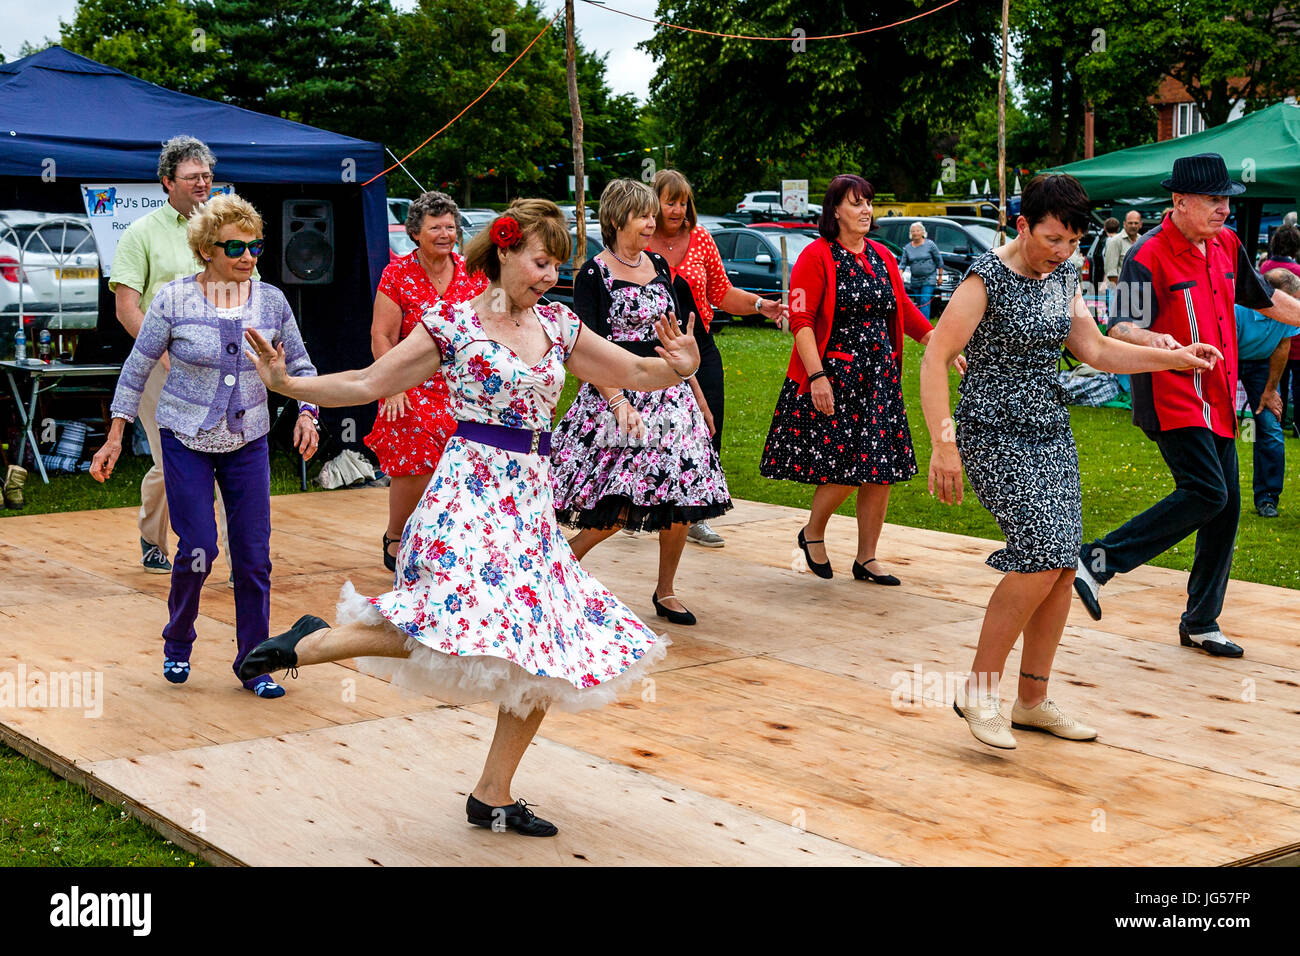 PJ's Dance Club Perform At The Nutley Village Fete, Nutley, East Sussex, UK Stock Photo